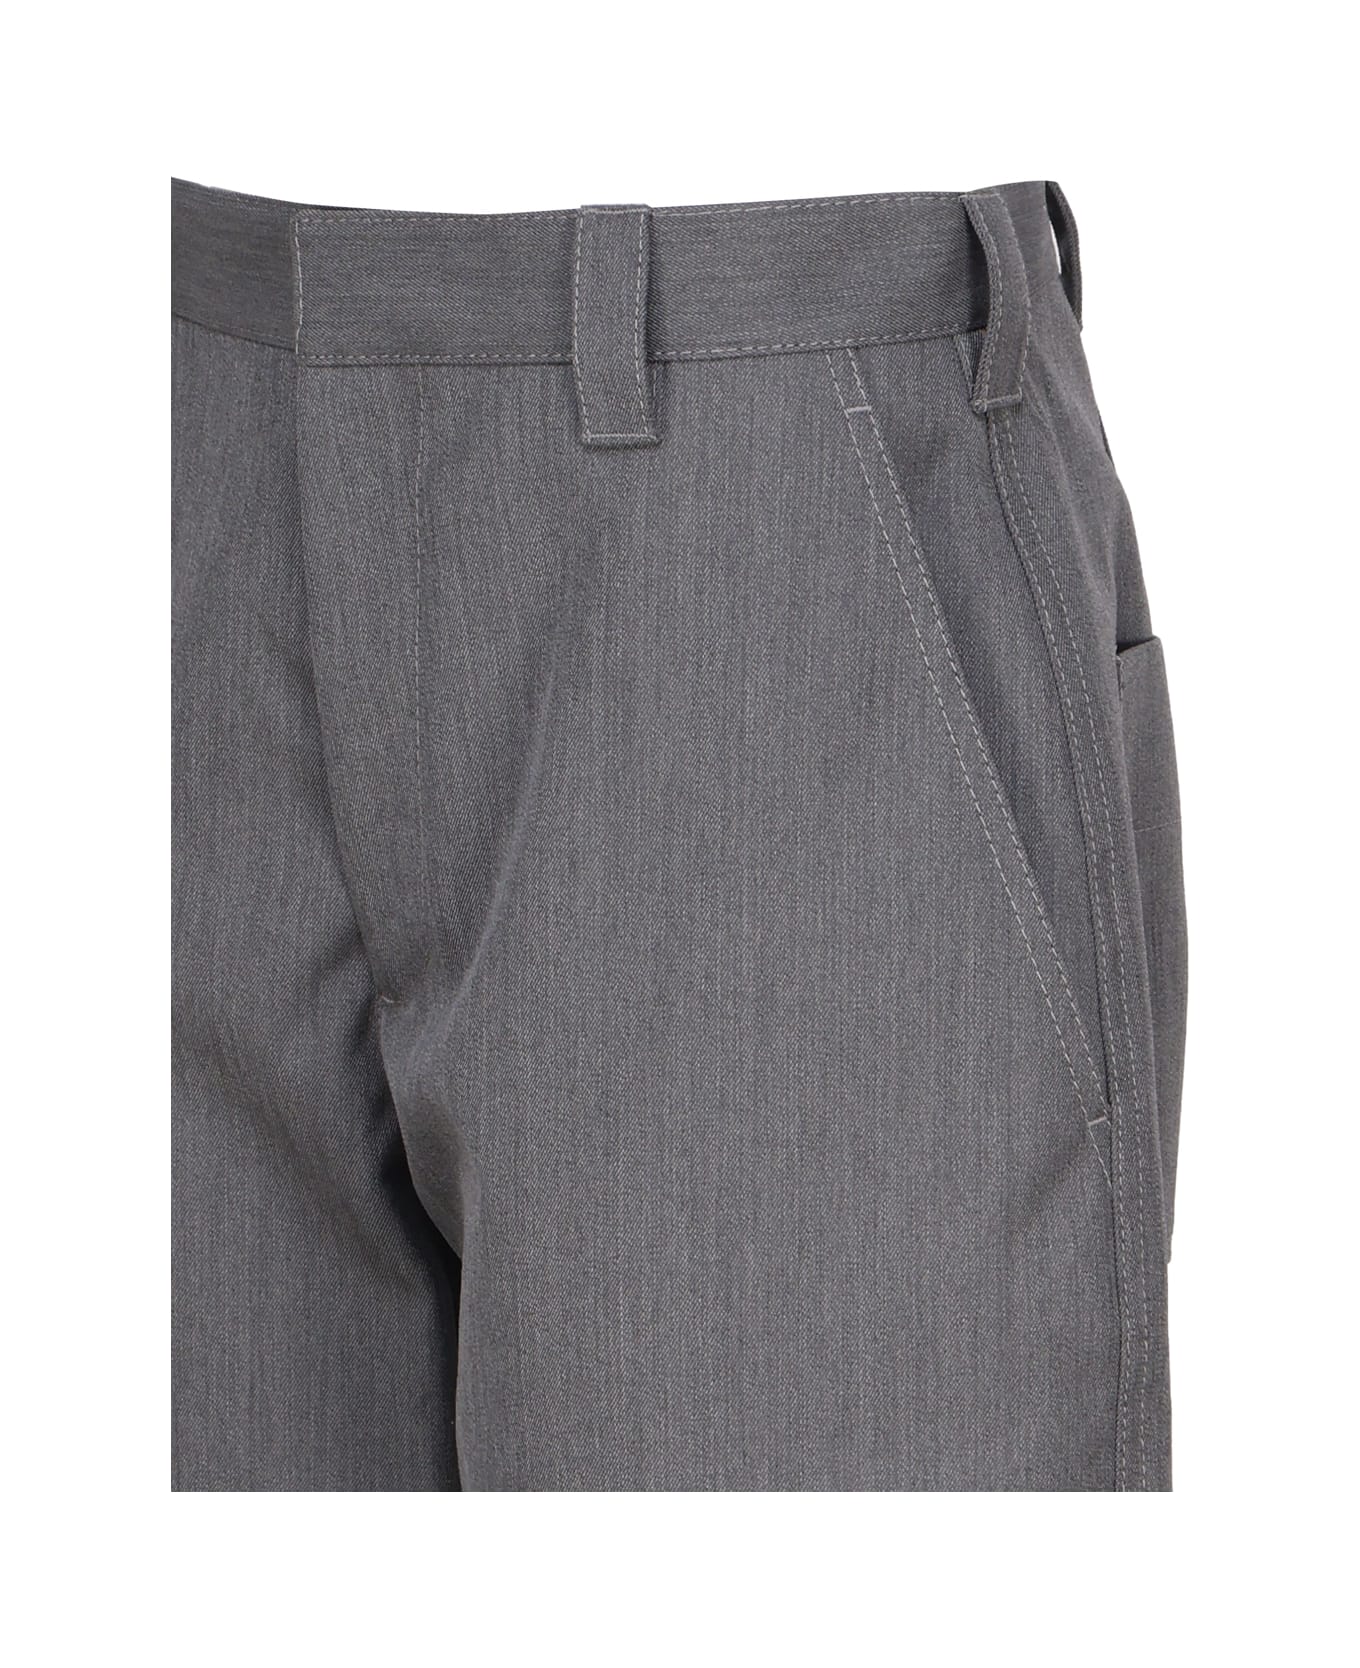 Bottega Veneta Tapered Trousers In Bonded Wool And Cotton - Charcoal/cane sugar